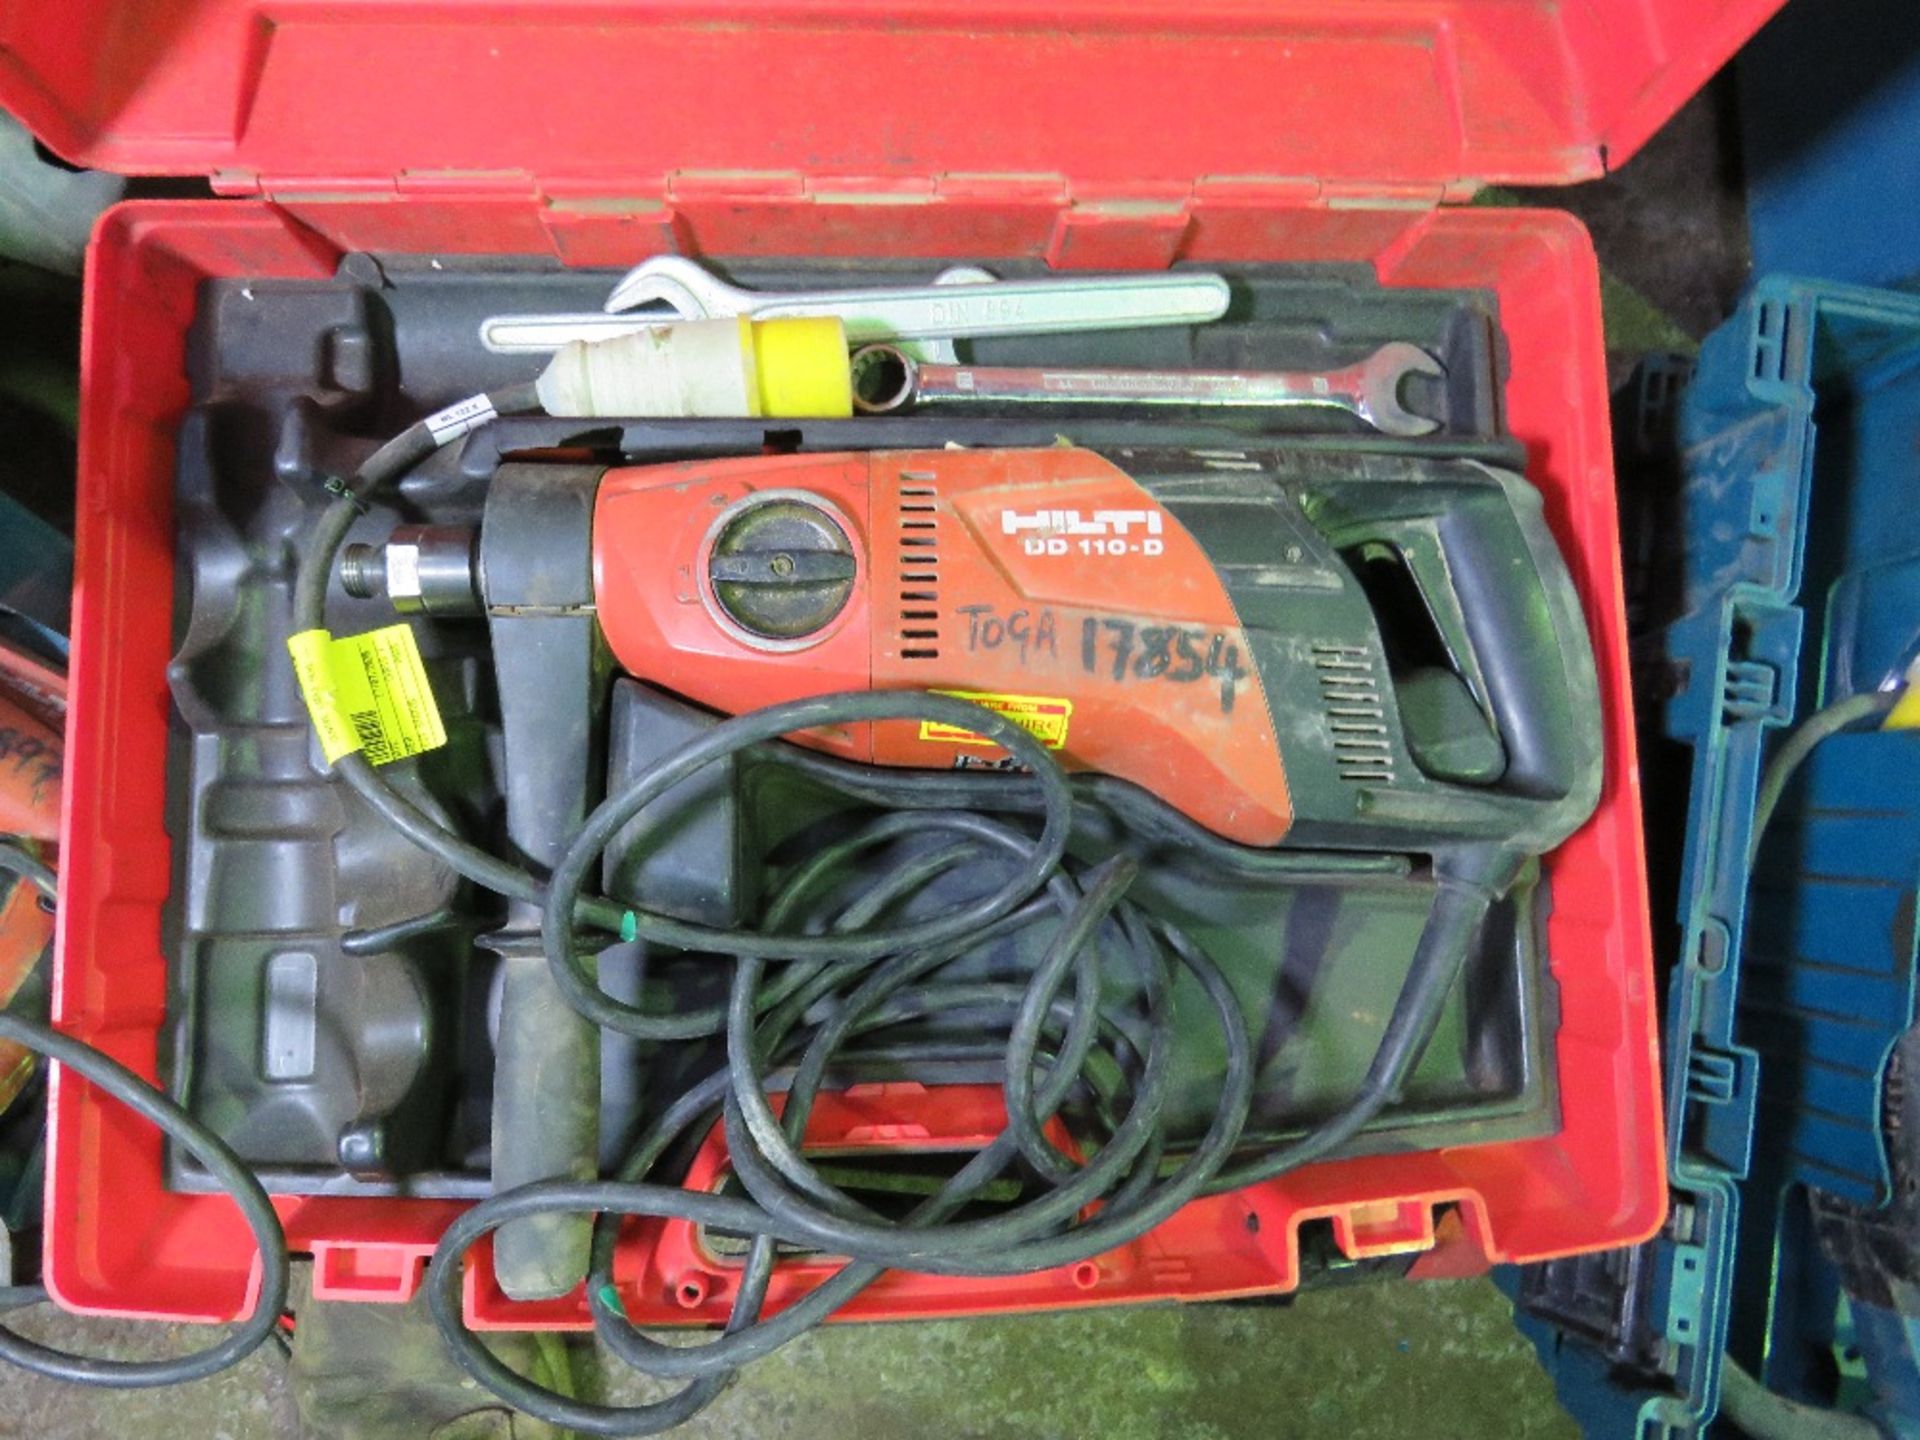 HILTI DD110-D DIAMOND DRILL PLUS ANOTHER ONE FOR SPARES/REPAIR. UNTESTED, CONDITION UNKNOWN.